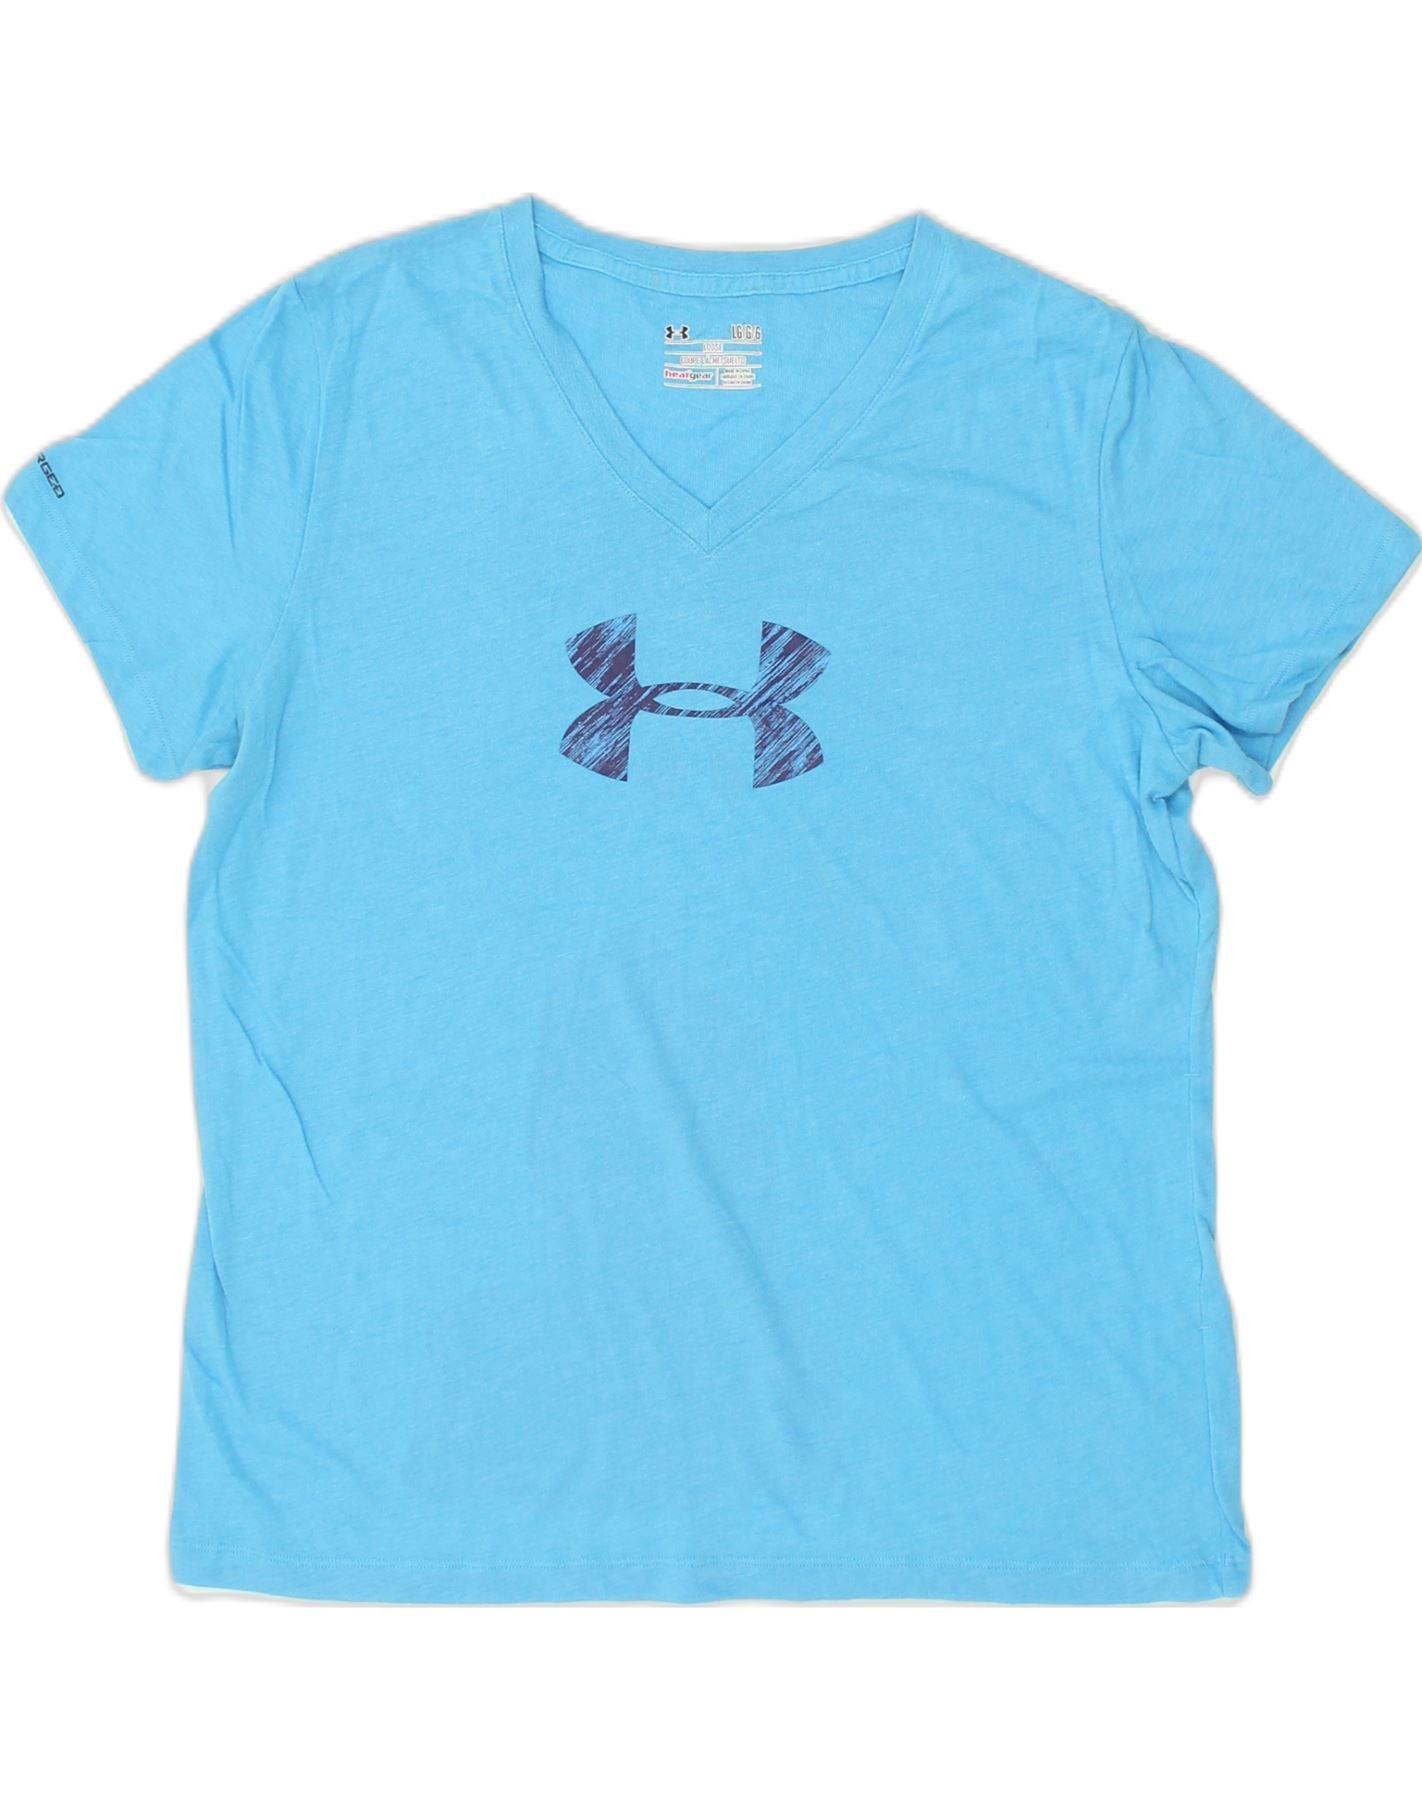 UNDER ARMOUR Womens loose Loose Fit Graphic T-Shirt Top UK 14